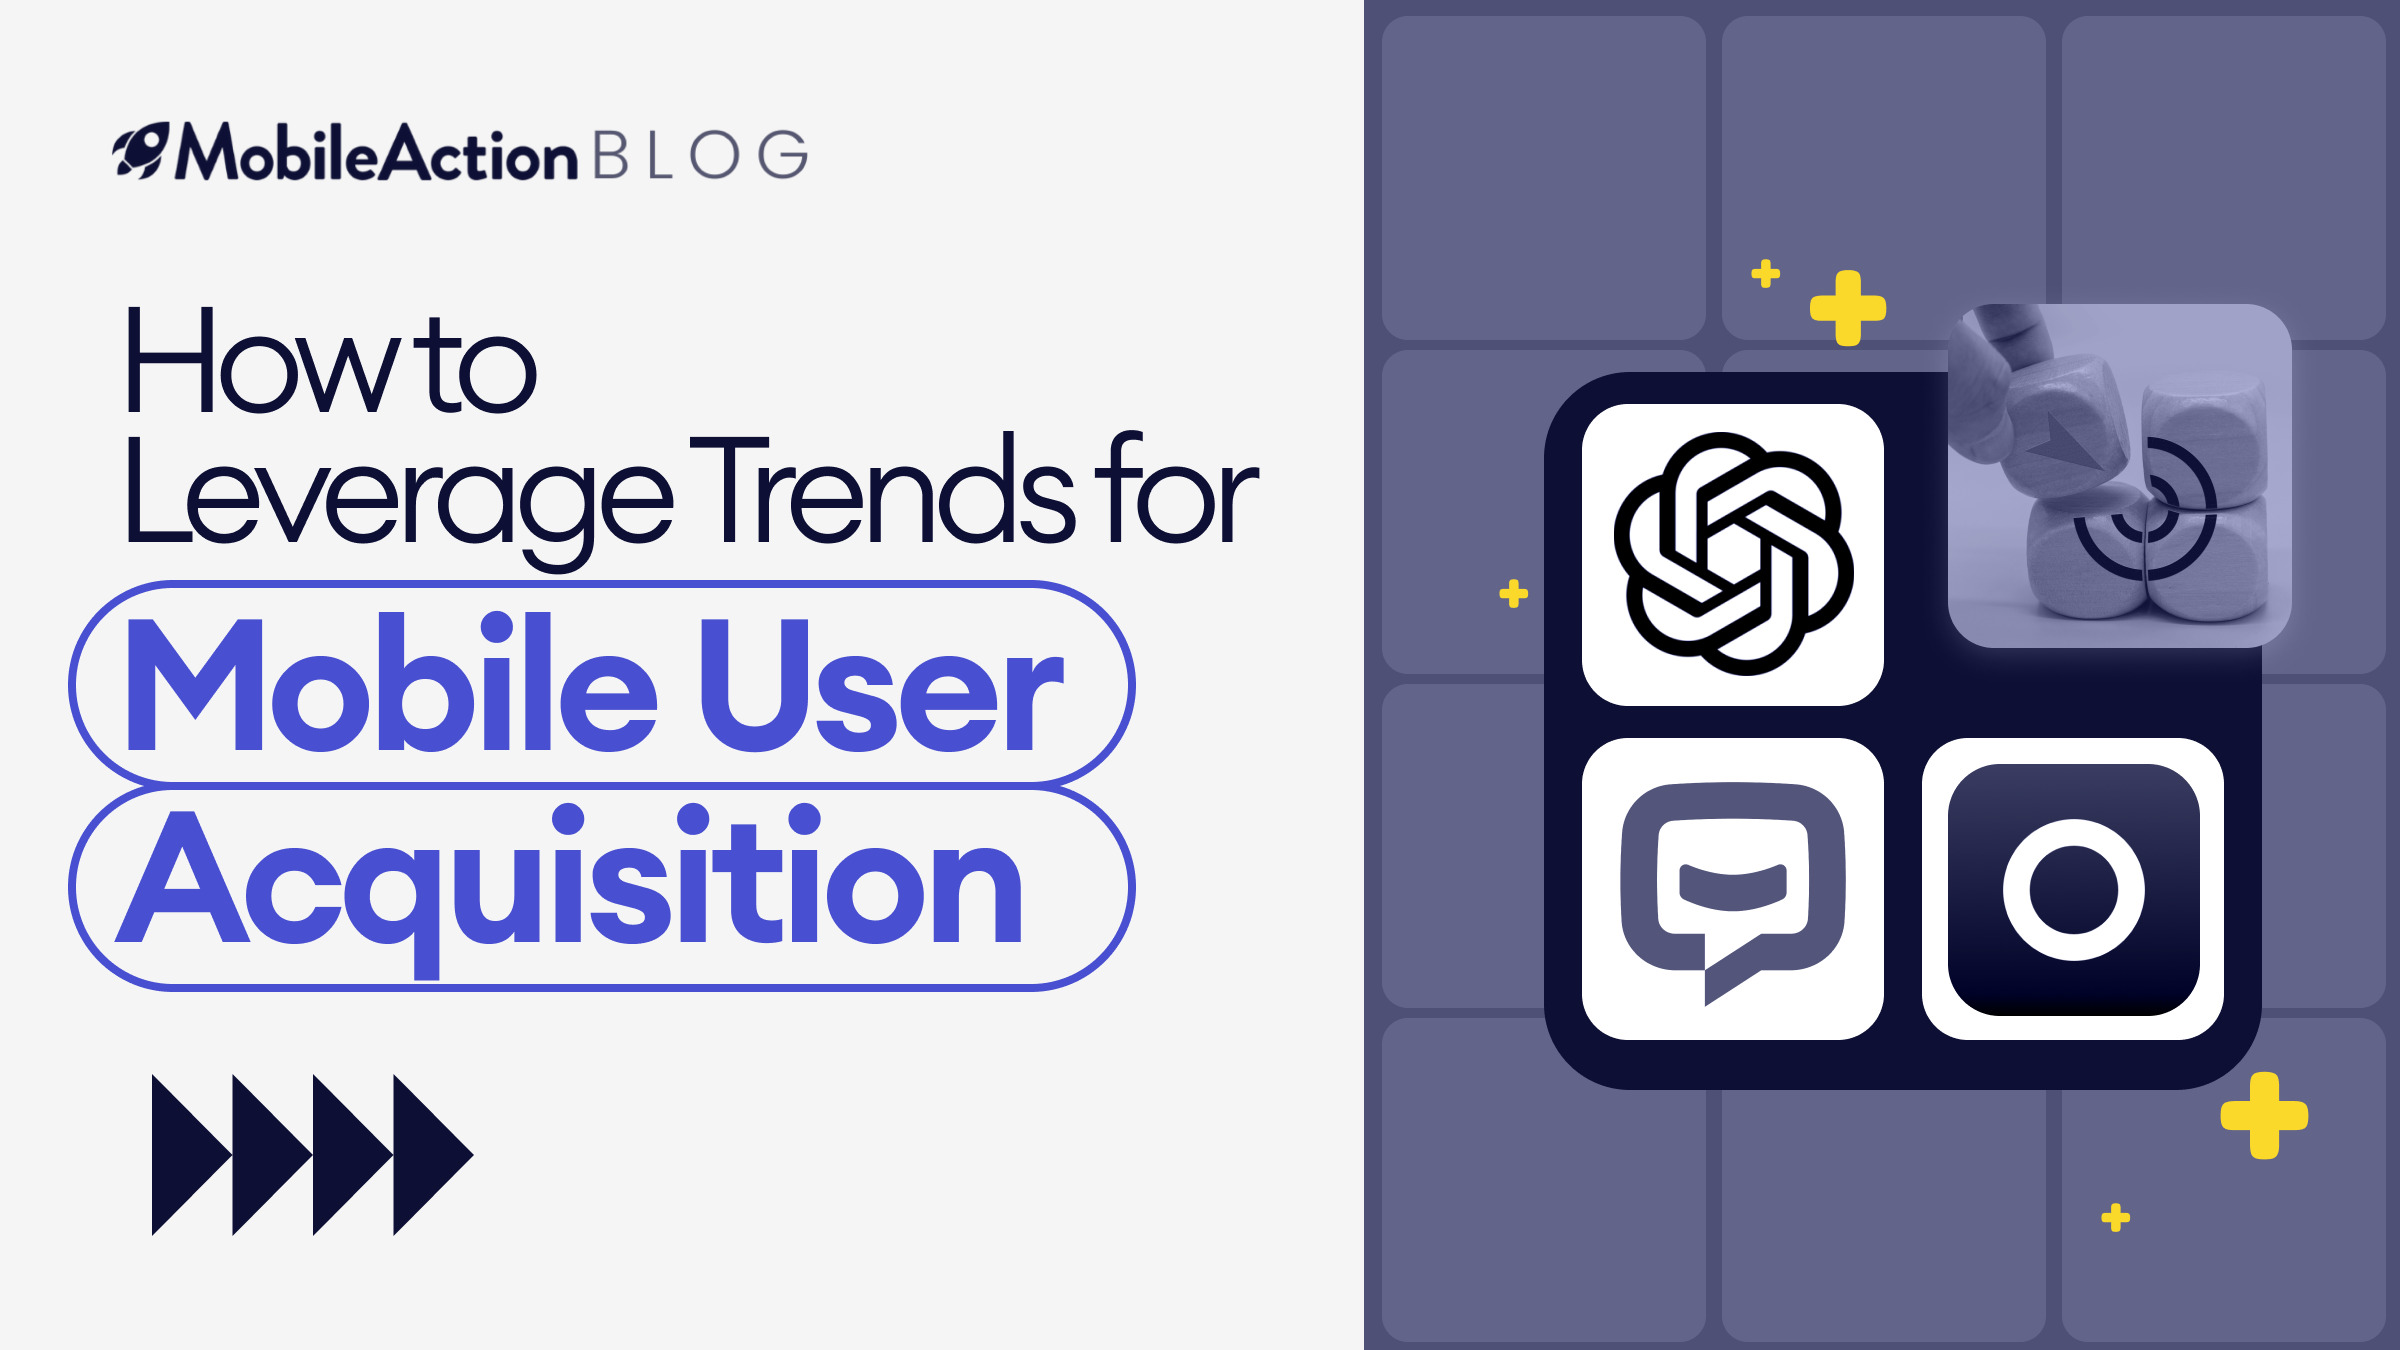 How to Leverage Trends for Mobile User Acquisition